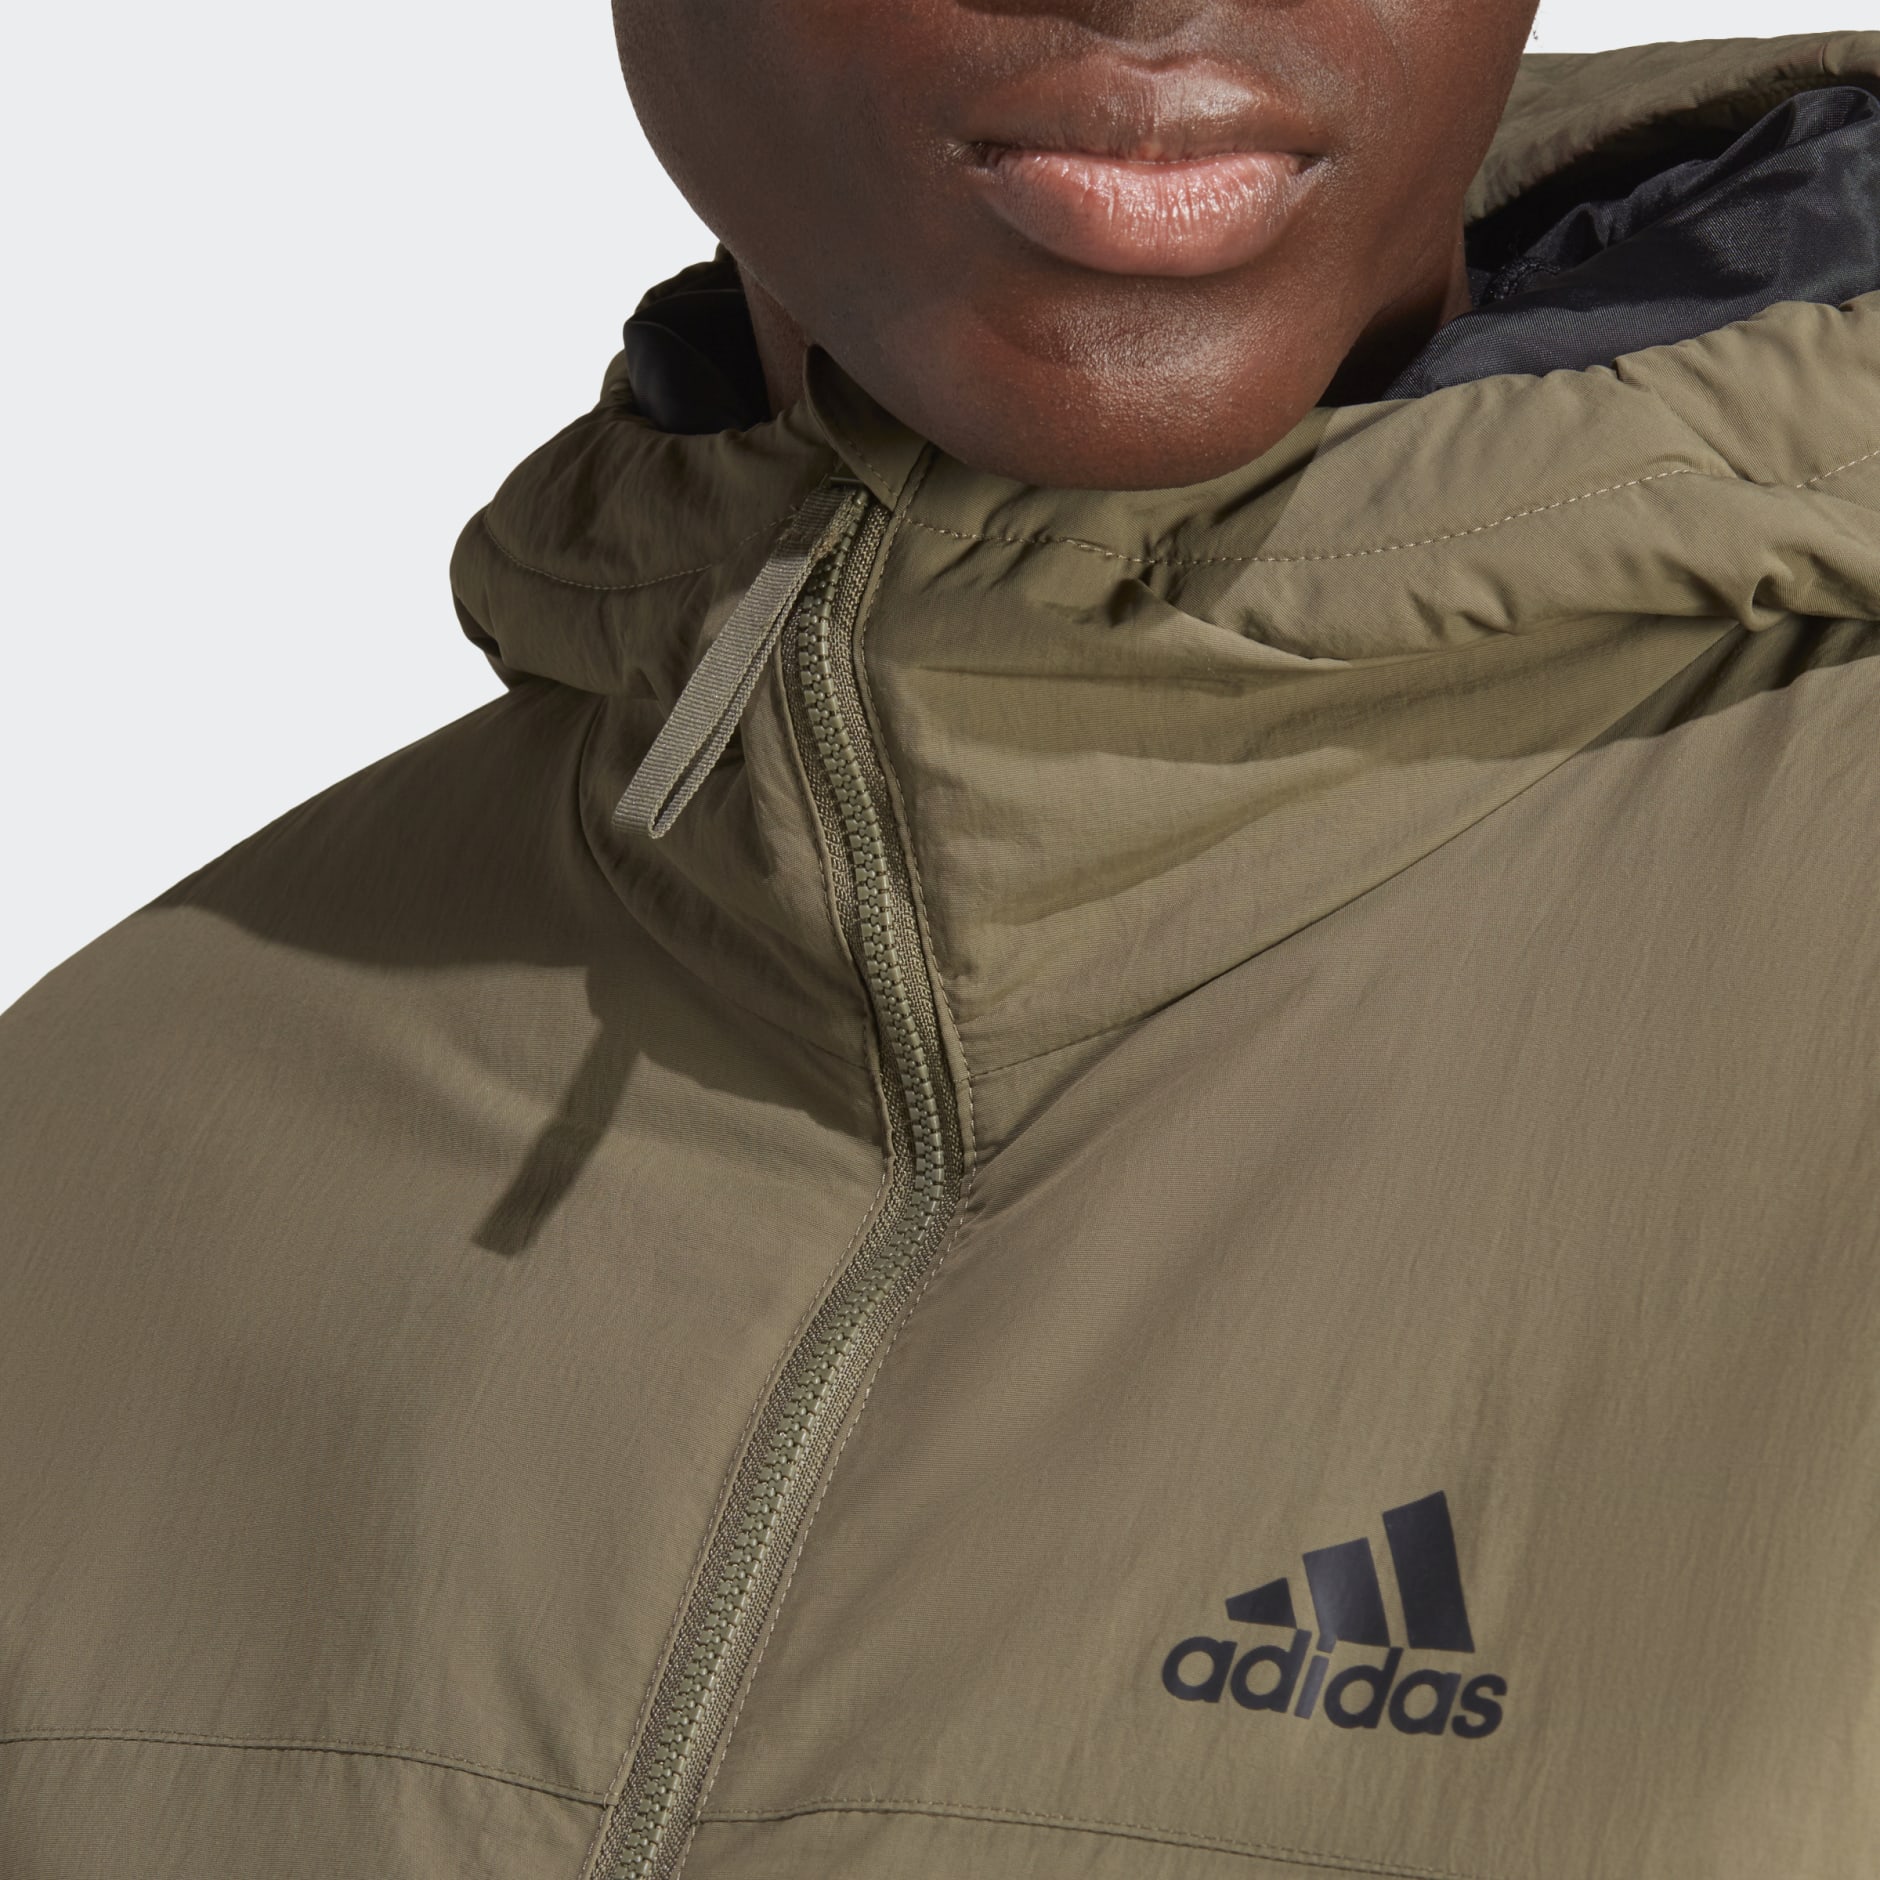 Clothing - BSC Sturdy Insulated Hooded Jacket - Green | adidas South Africa